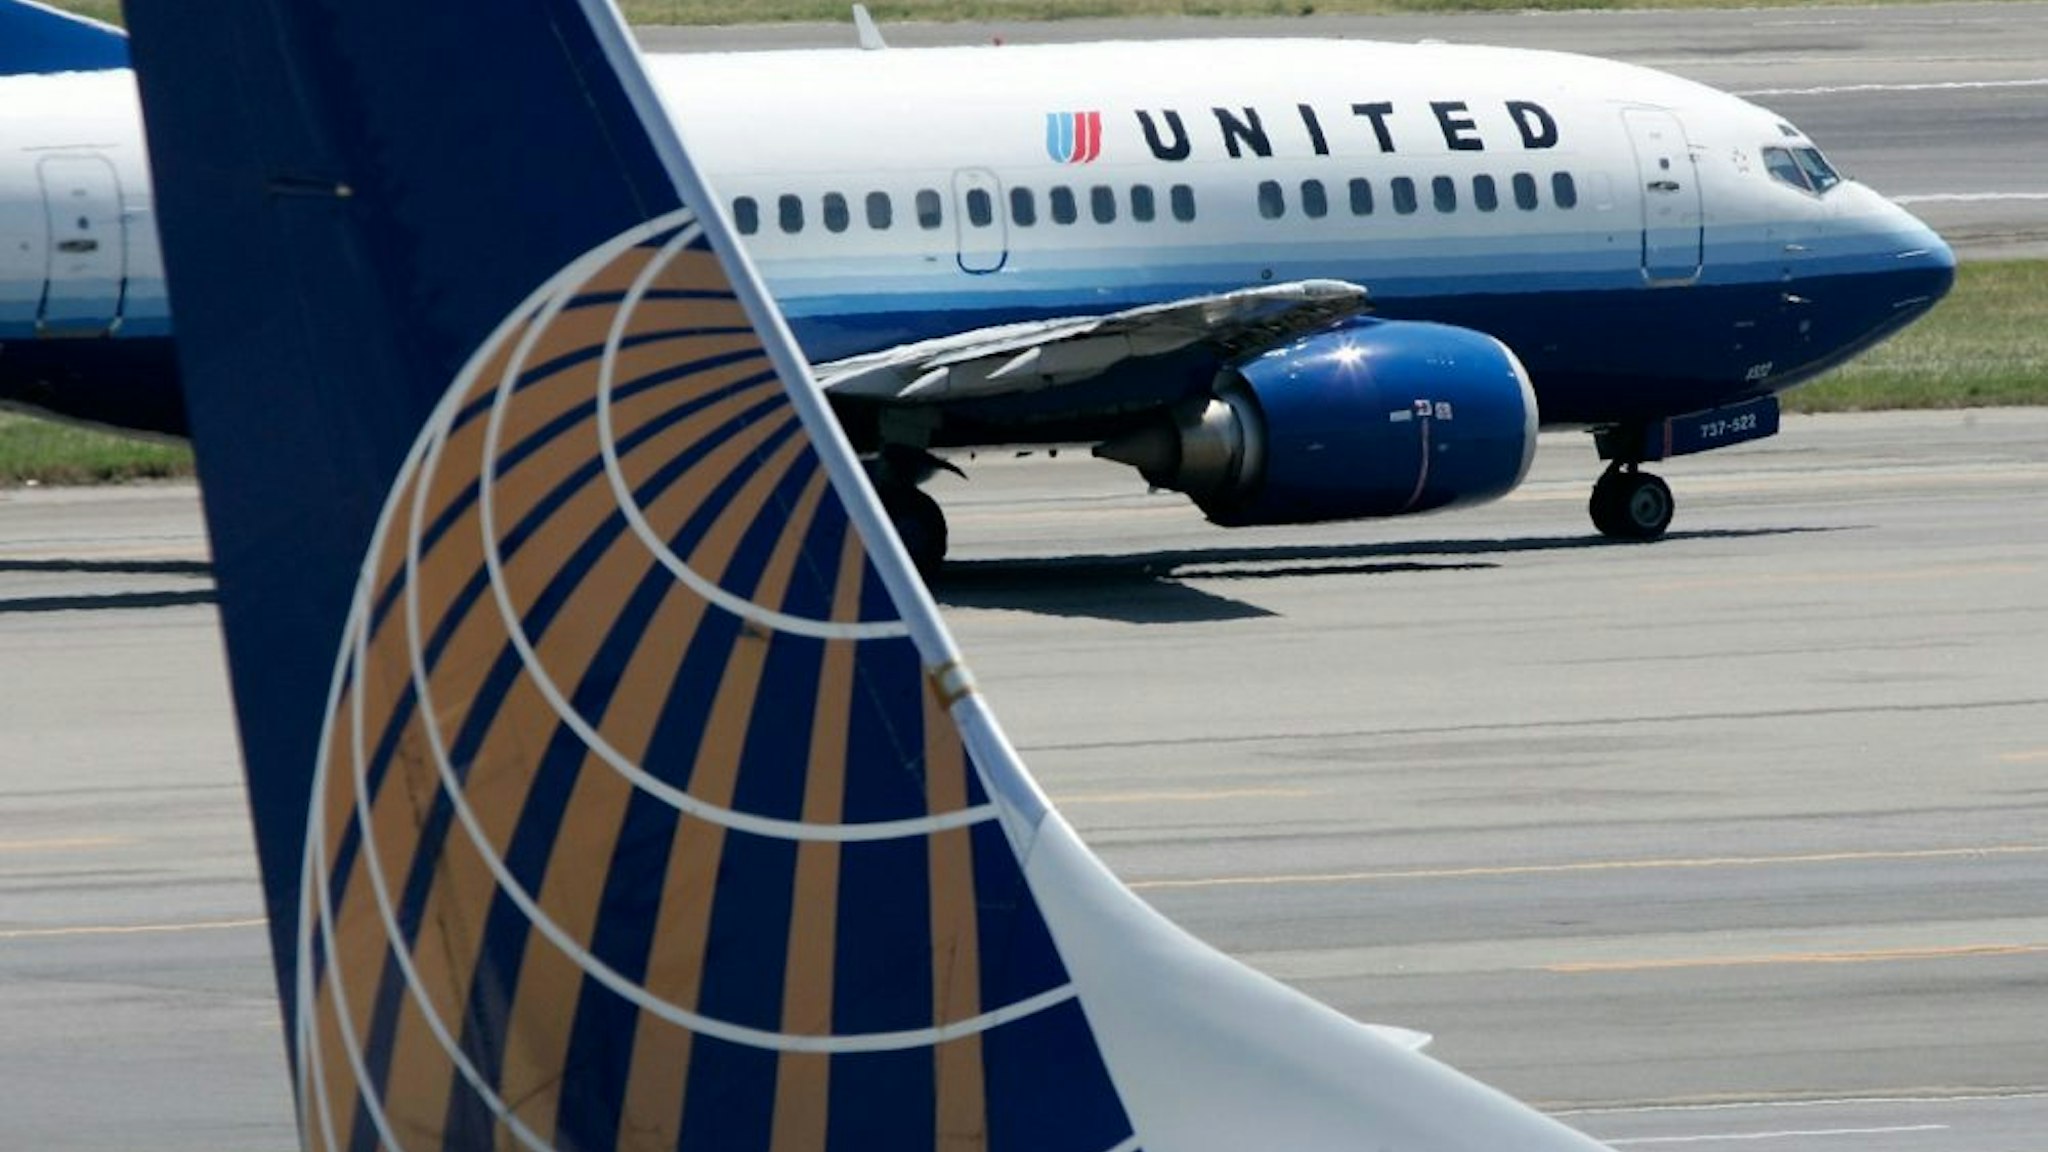 WASHINGTON - AUGUST 16: A United Airlines aircraft passes by a Continental Airlines aircraft as it taxis to takeoff from the runway of Ronald Reagan National Airport August 16, 2006 in Washington, DC.